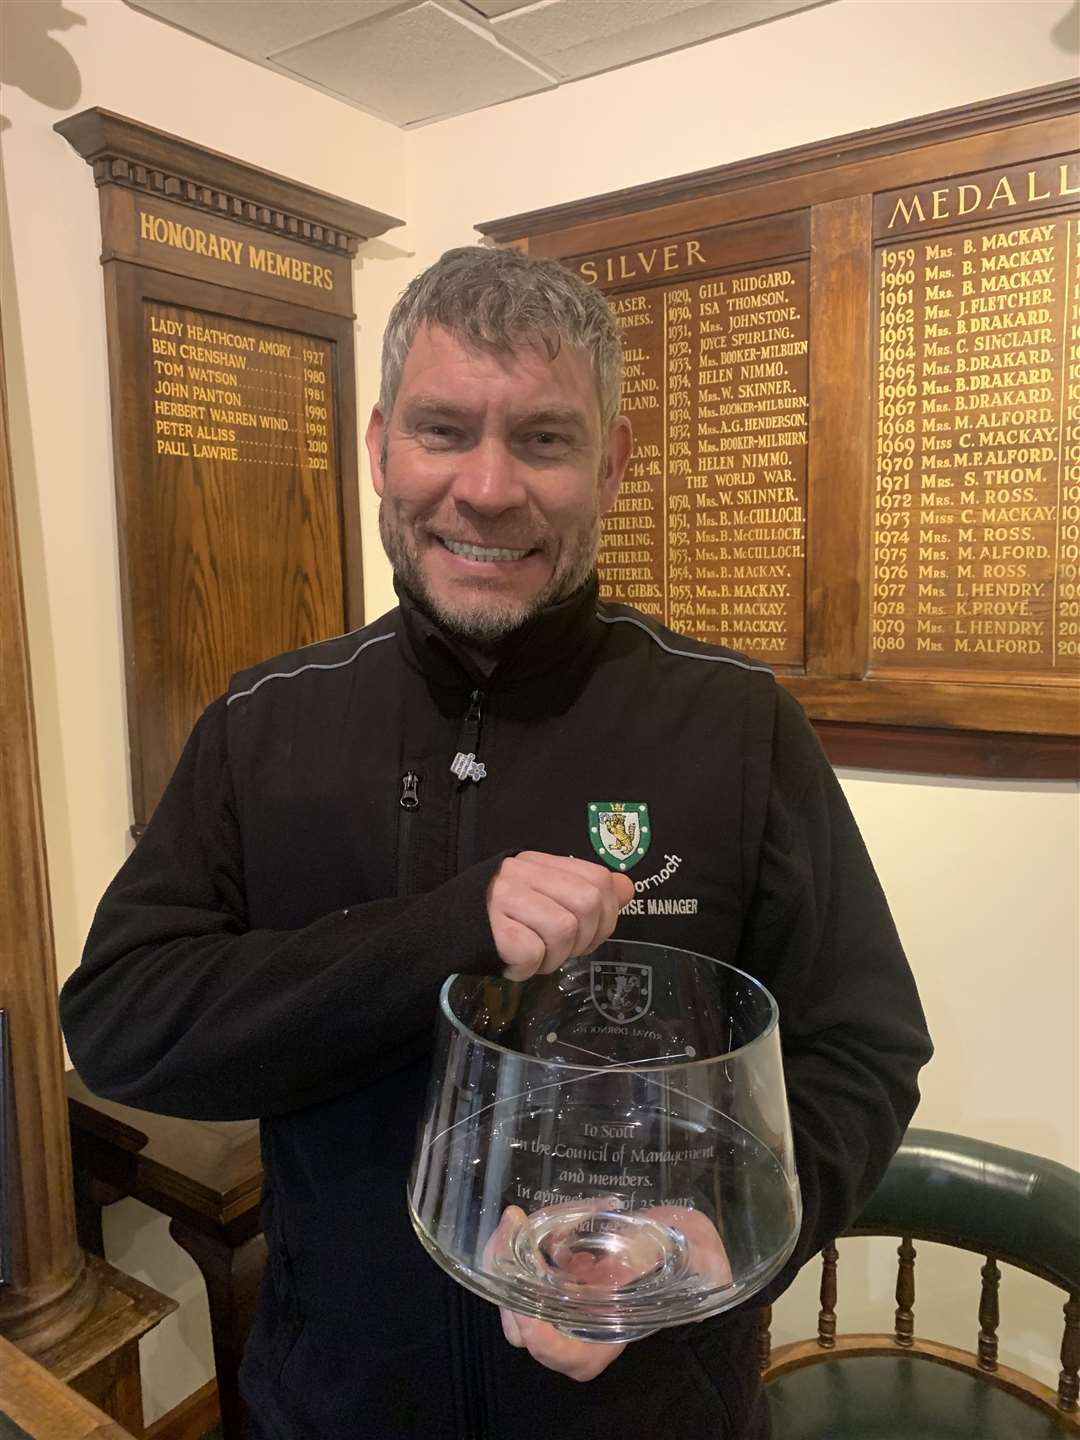 Deputy course manager Scott "Scoosh" Aitchison has been presented with an engraved crystal bowl to mark 25 years of service to Royal Dornoch Golf Club.